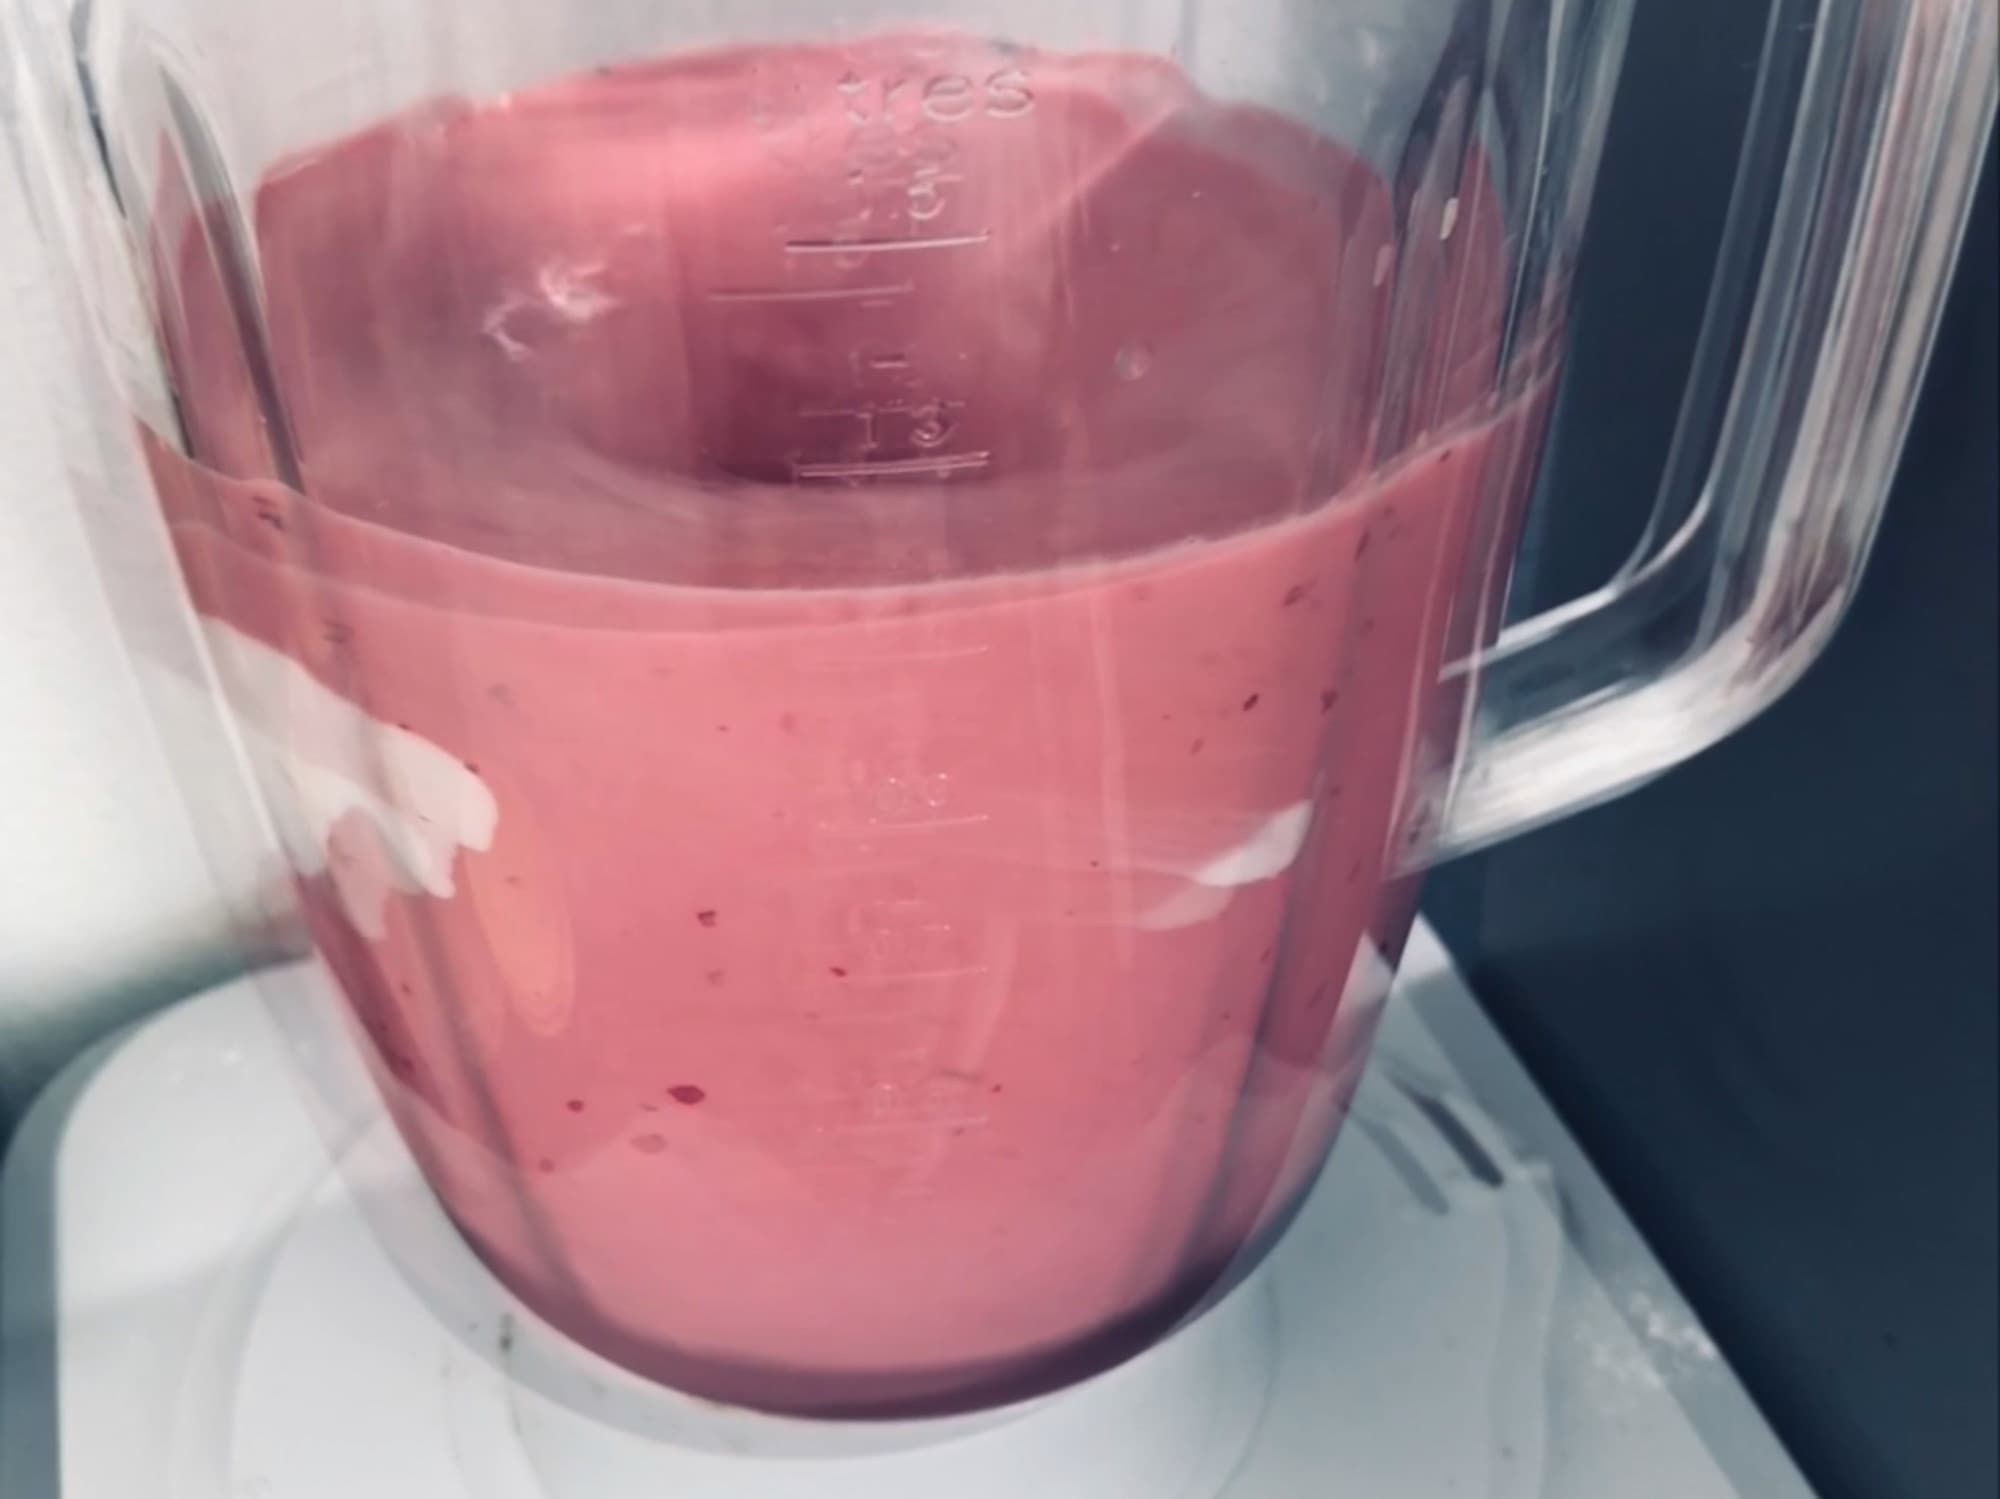 It’s hard to convey a moving photo with a still image, but doesn’t this smoothie look delicious?